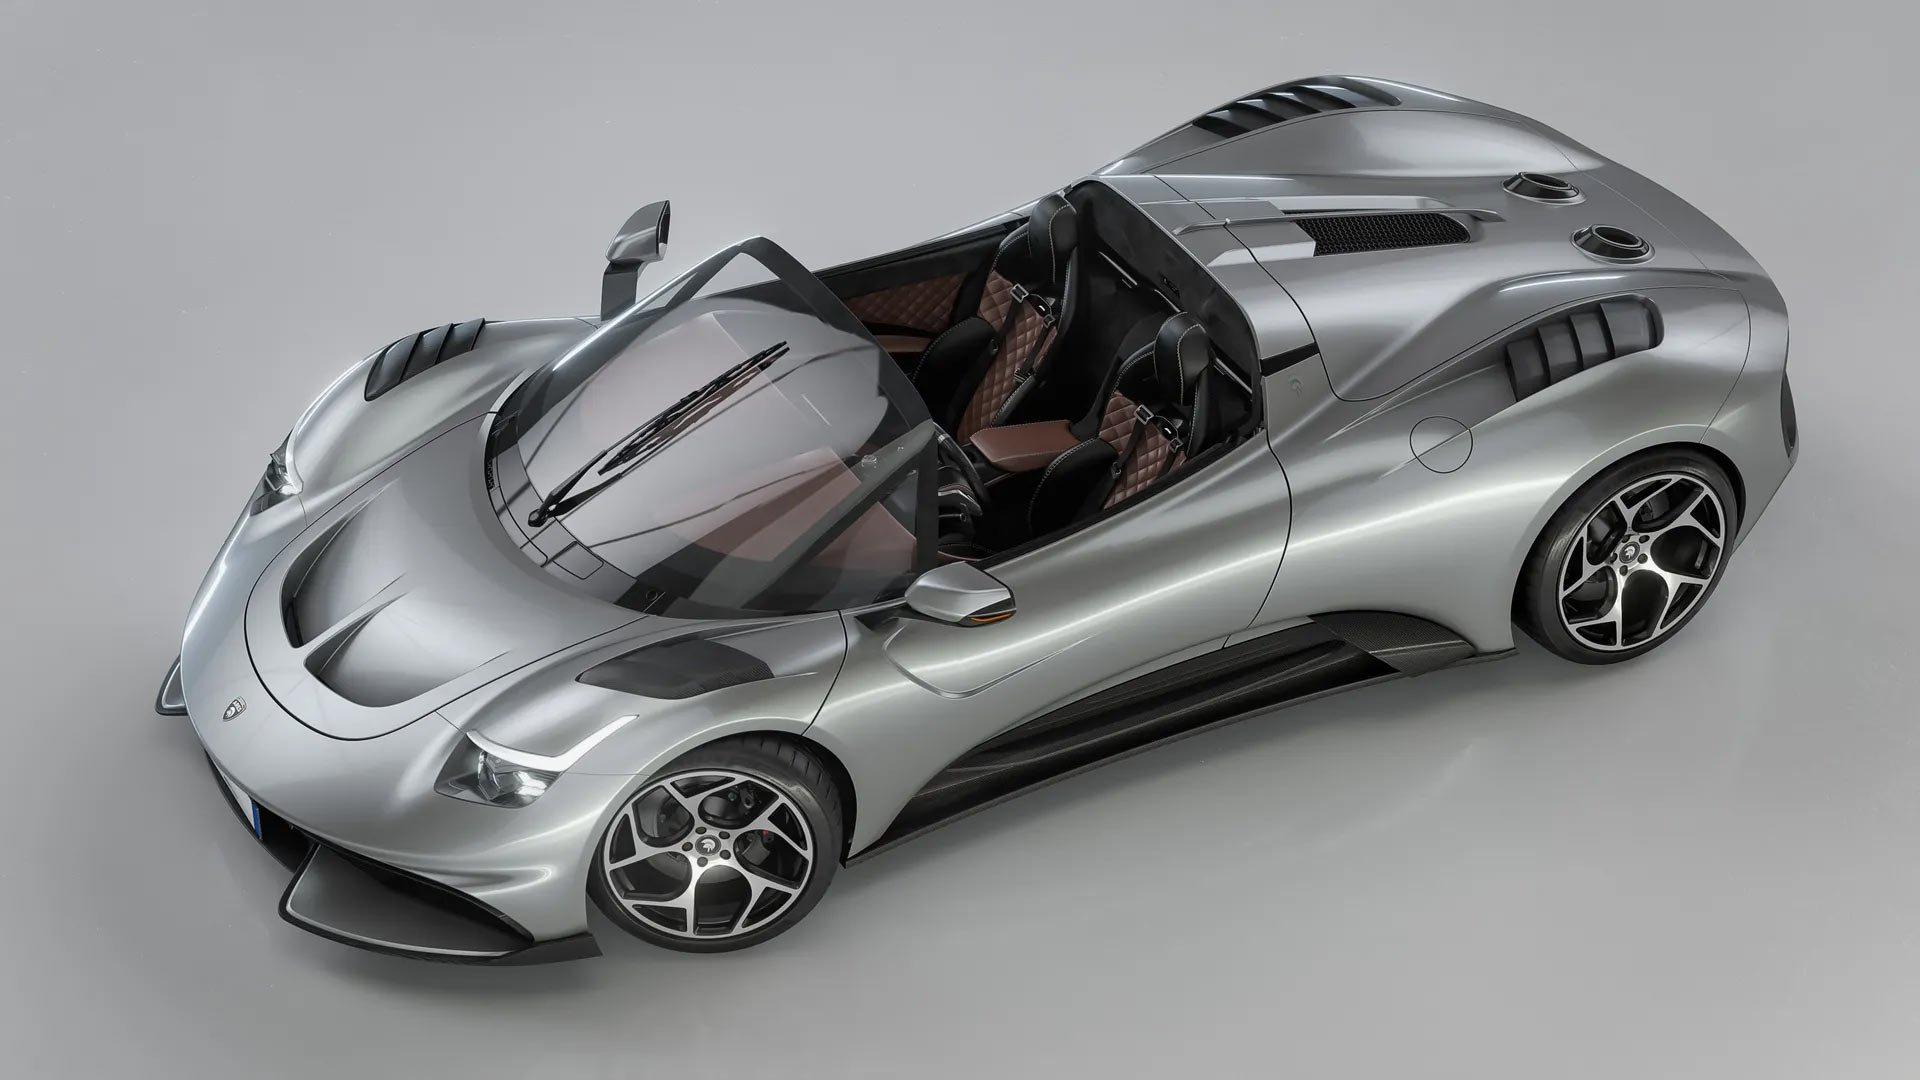 ares modena S1 speedster convertible hypercar concept shown from top